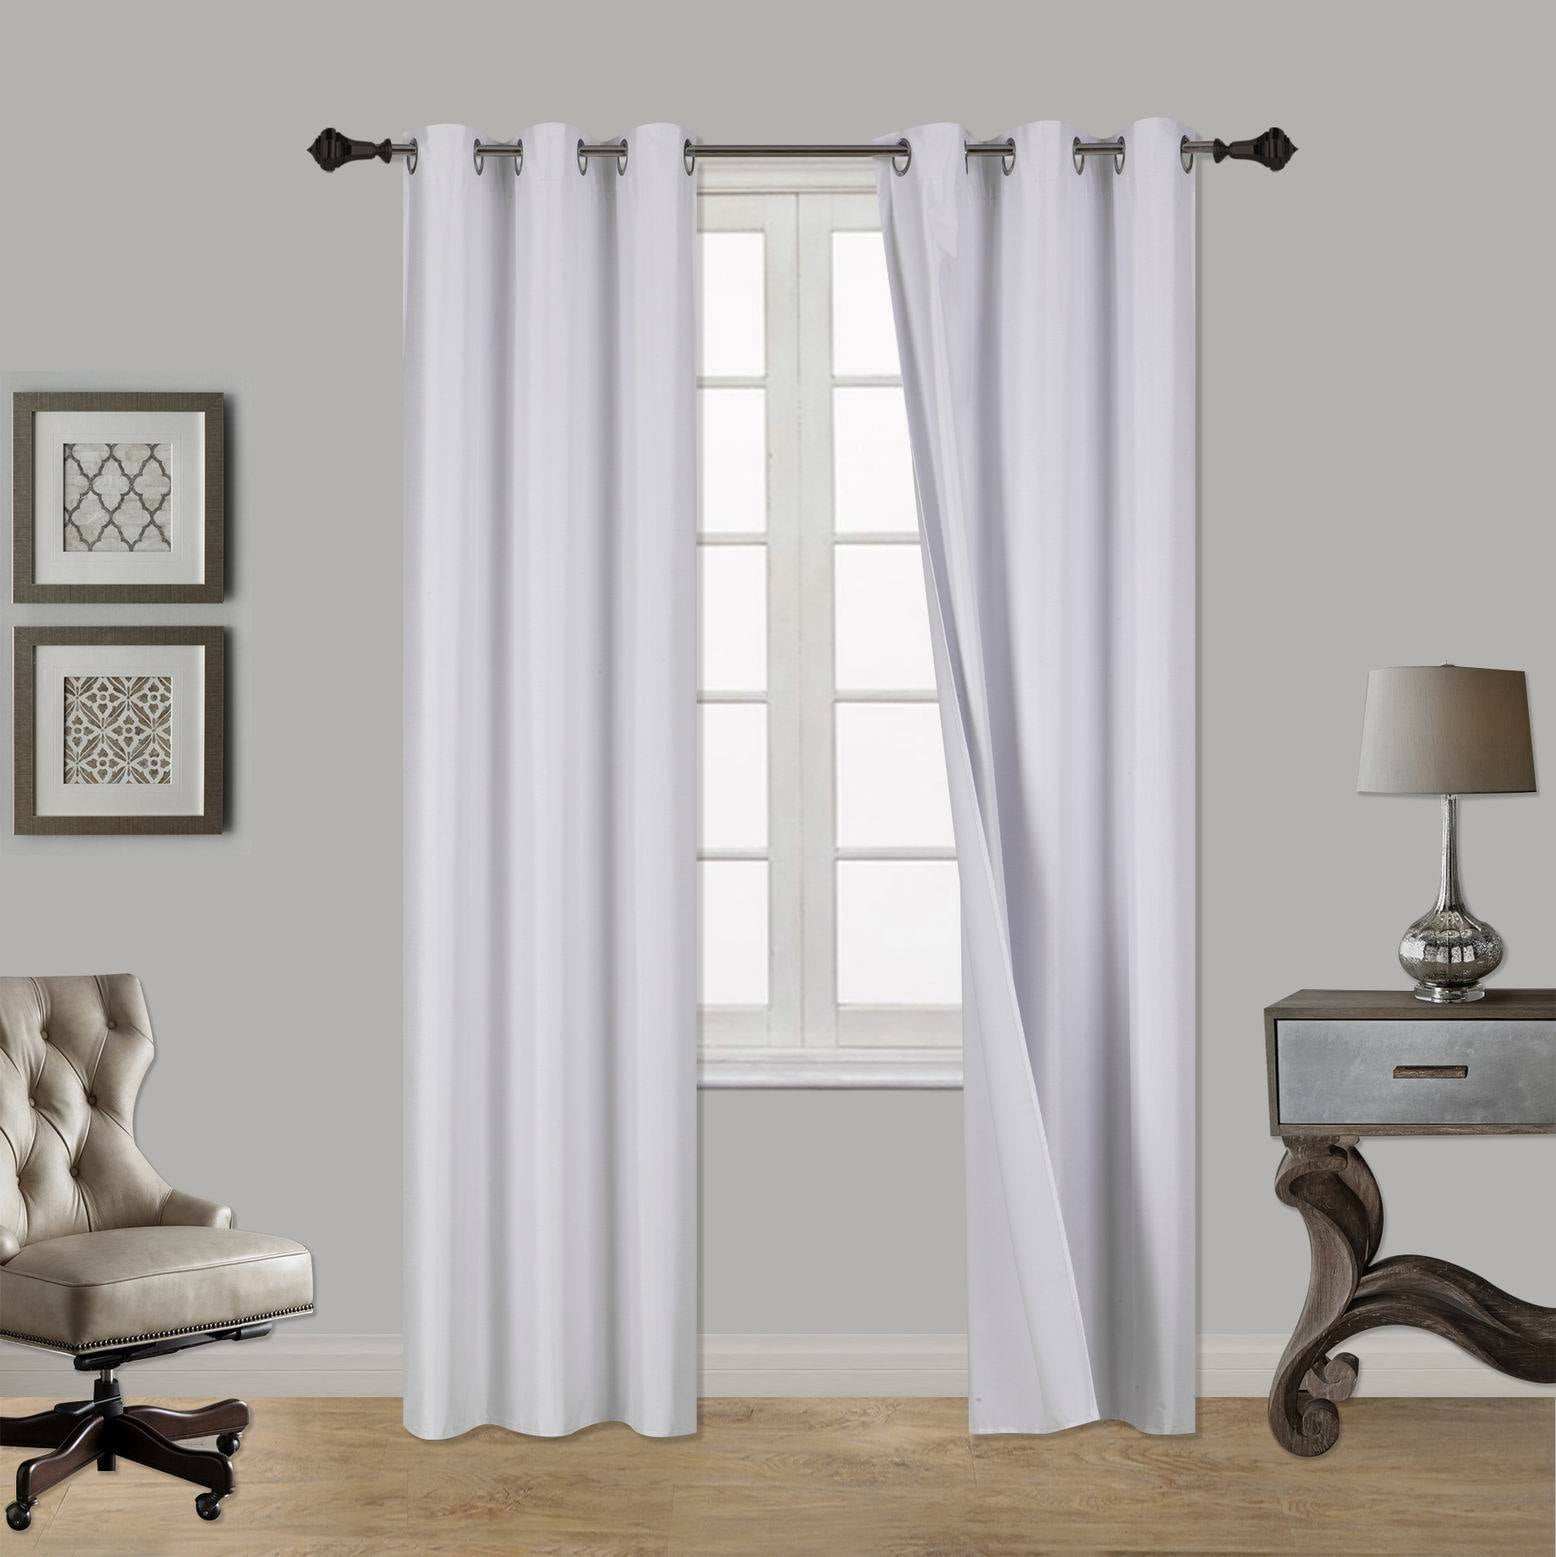 1 SAGE GREEN SOLID PANEL THERMAL LINED BLACKOUT GROMMET WINDOW CURTAIN K32 84" 